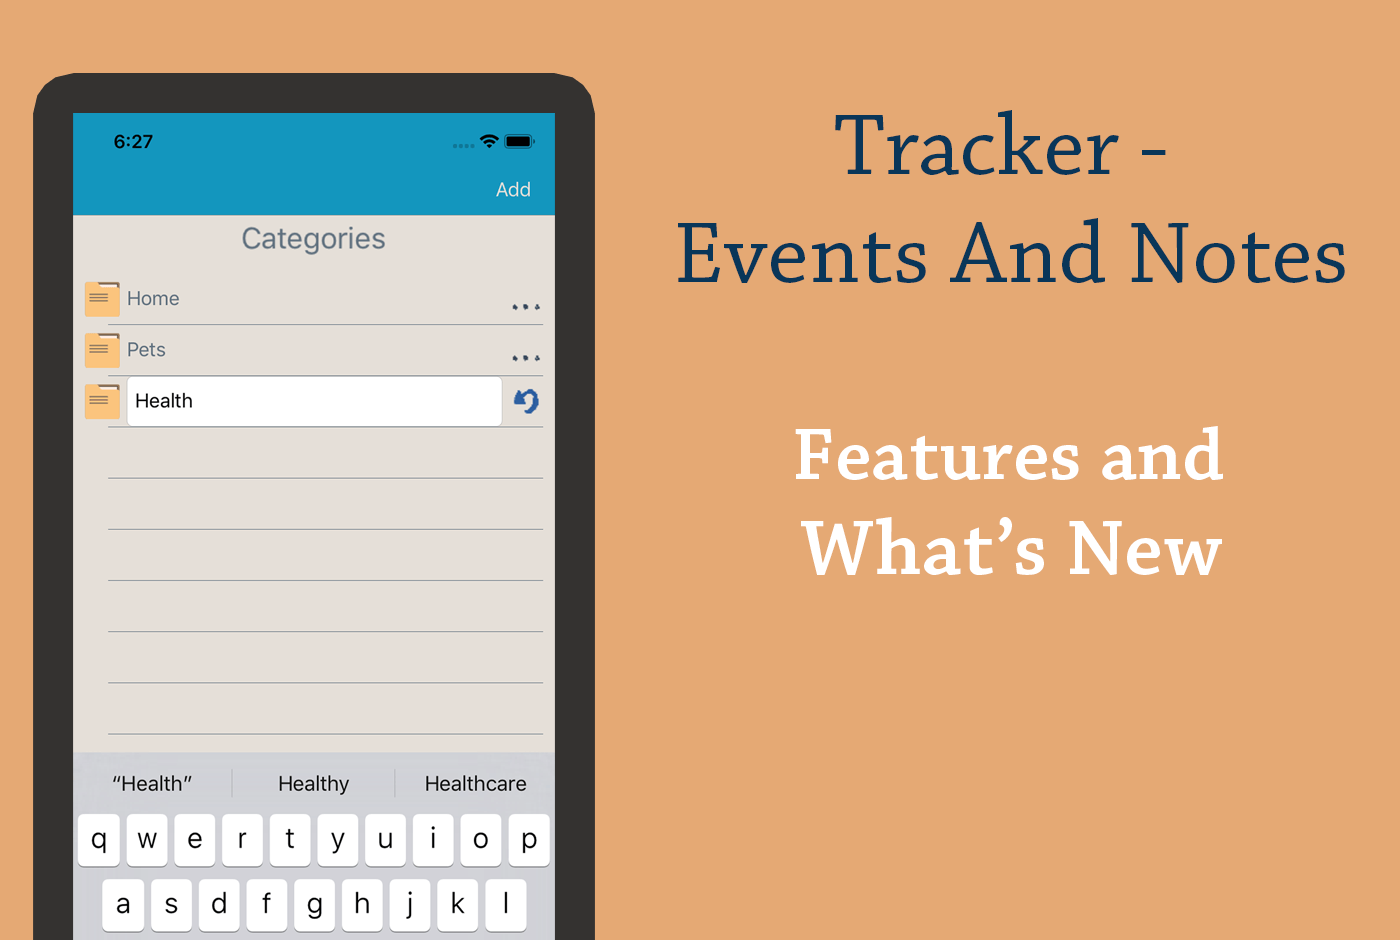 Tracker - Events and Notes: Features and What's New